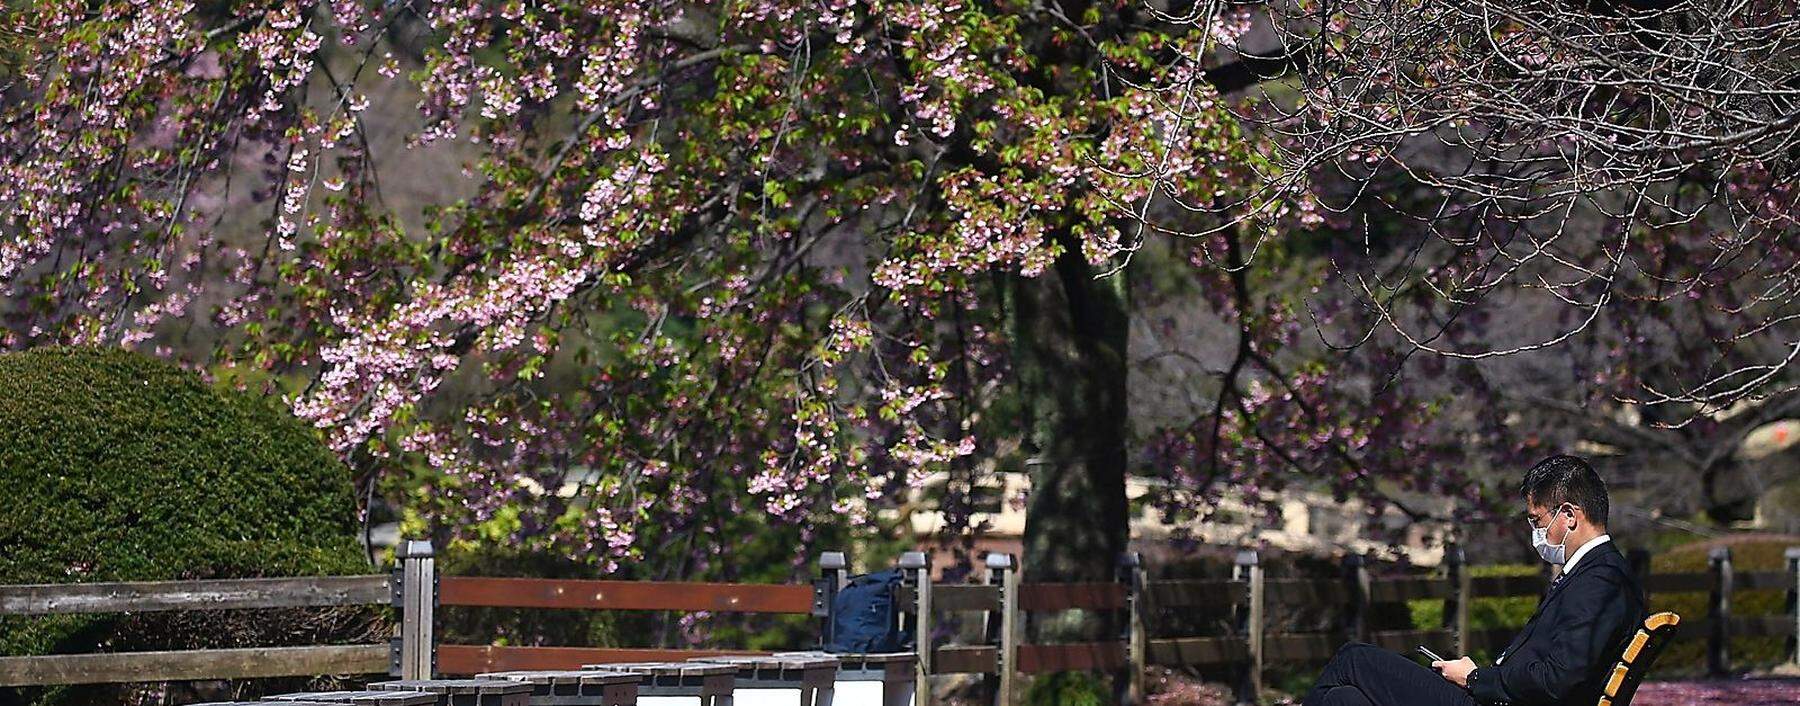 A visitor wearing a protective face mask rests under early flowering Kanzakura cherry blossoms at Shinjuku Gyoen National Garden in Tokyo